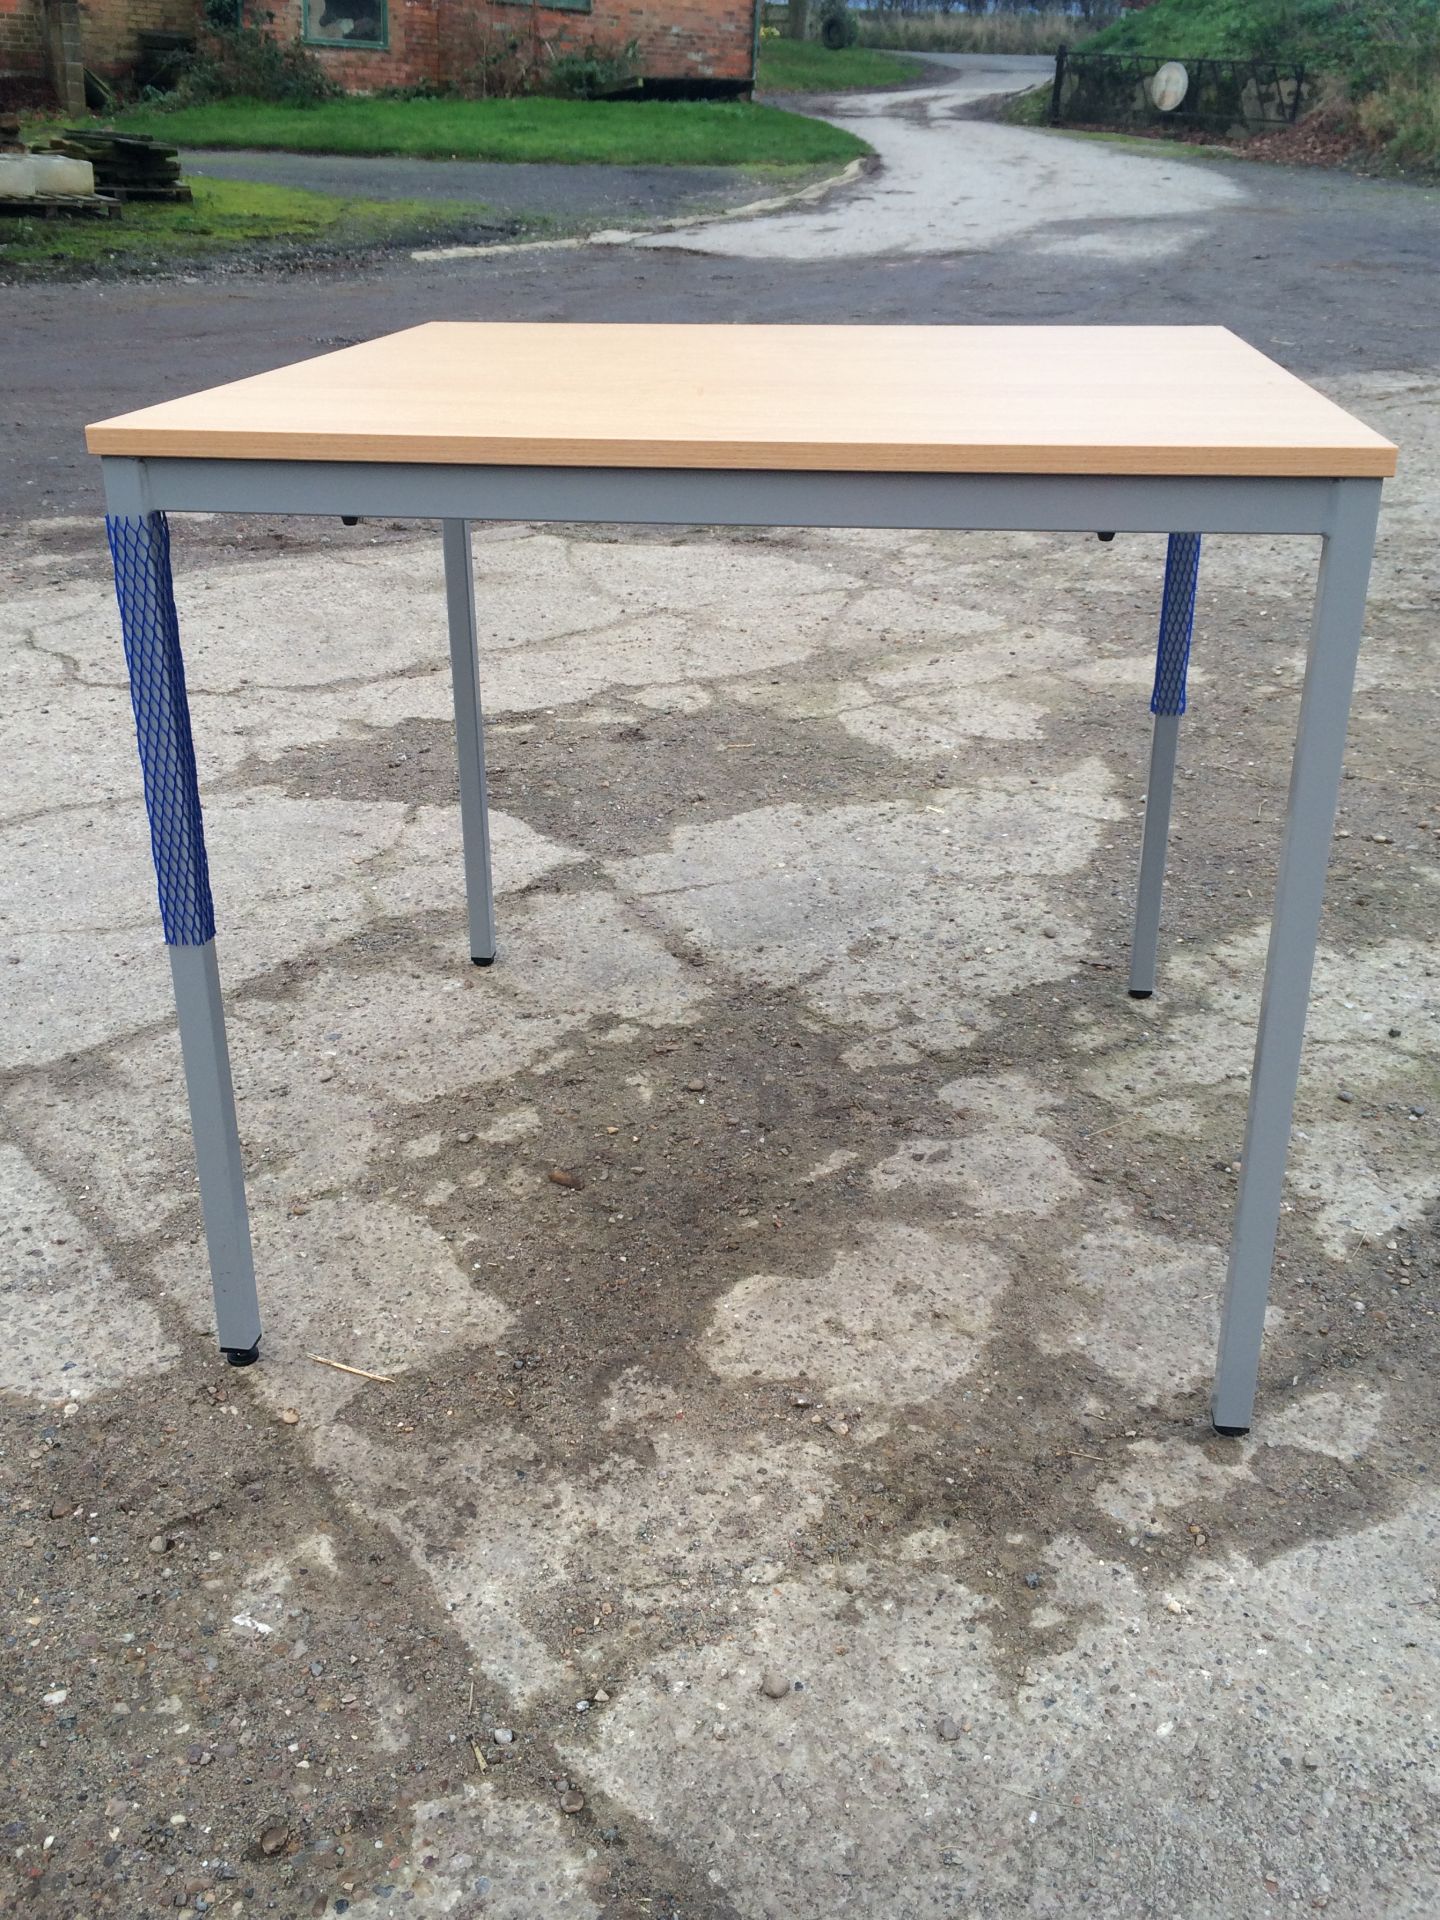 Square Wooden Effect Table With Metal Legs ( Height: 73cm / Width: 80cm ) - Image 2 of 3